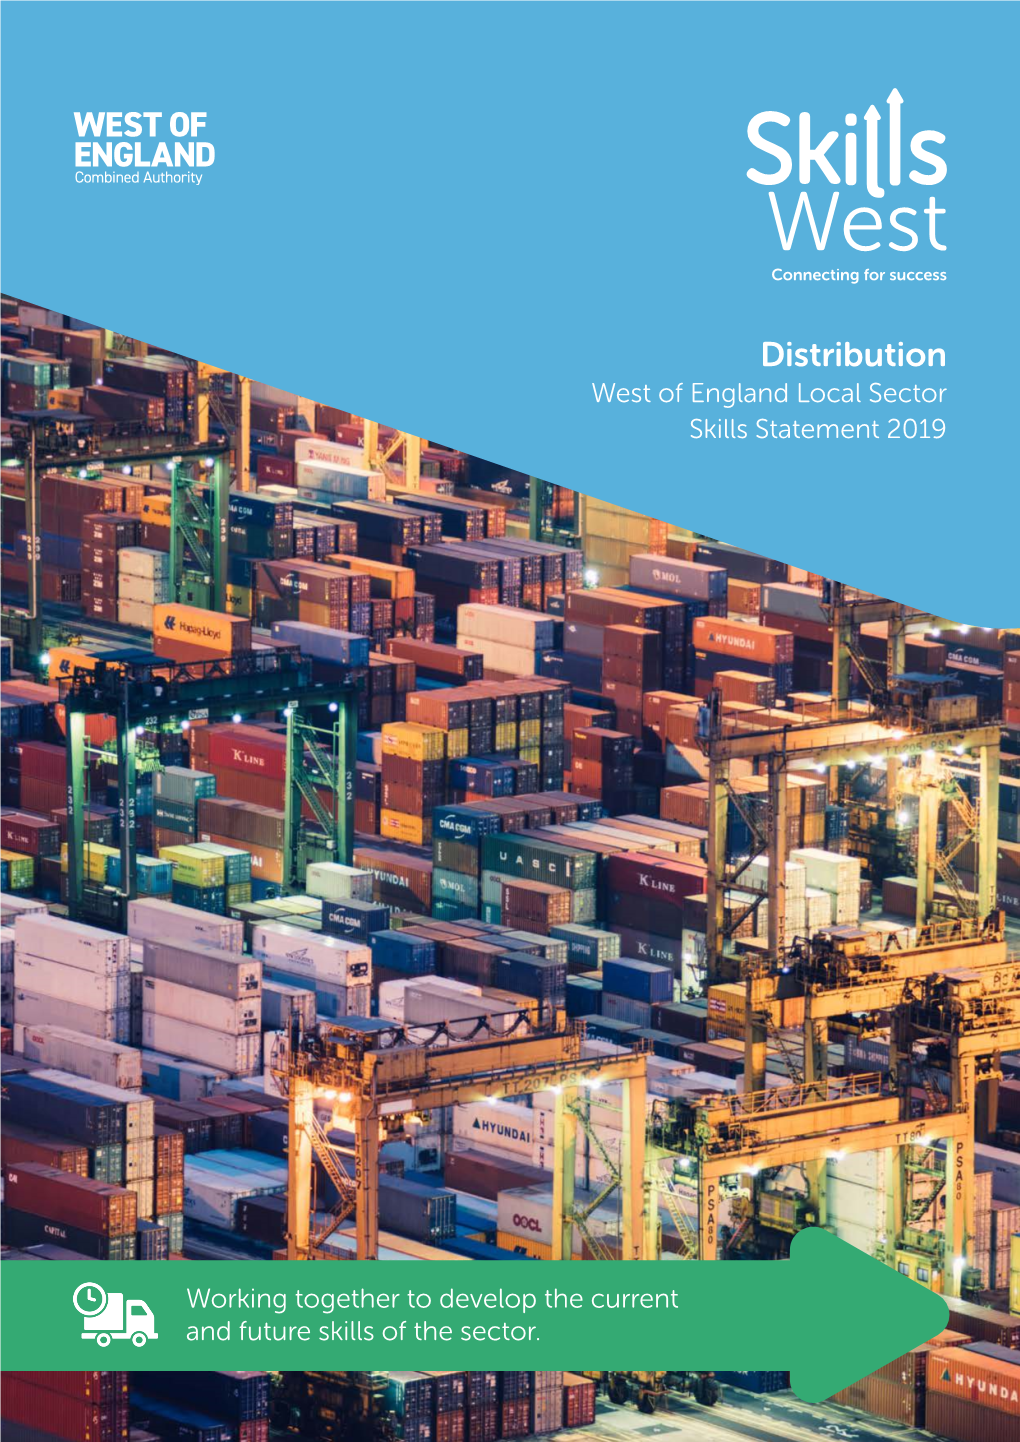 Distribution West of England Local Sector Skills Statement 2019